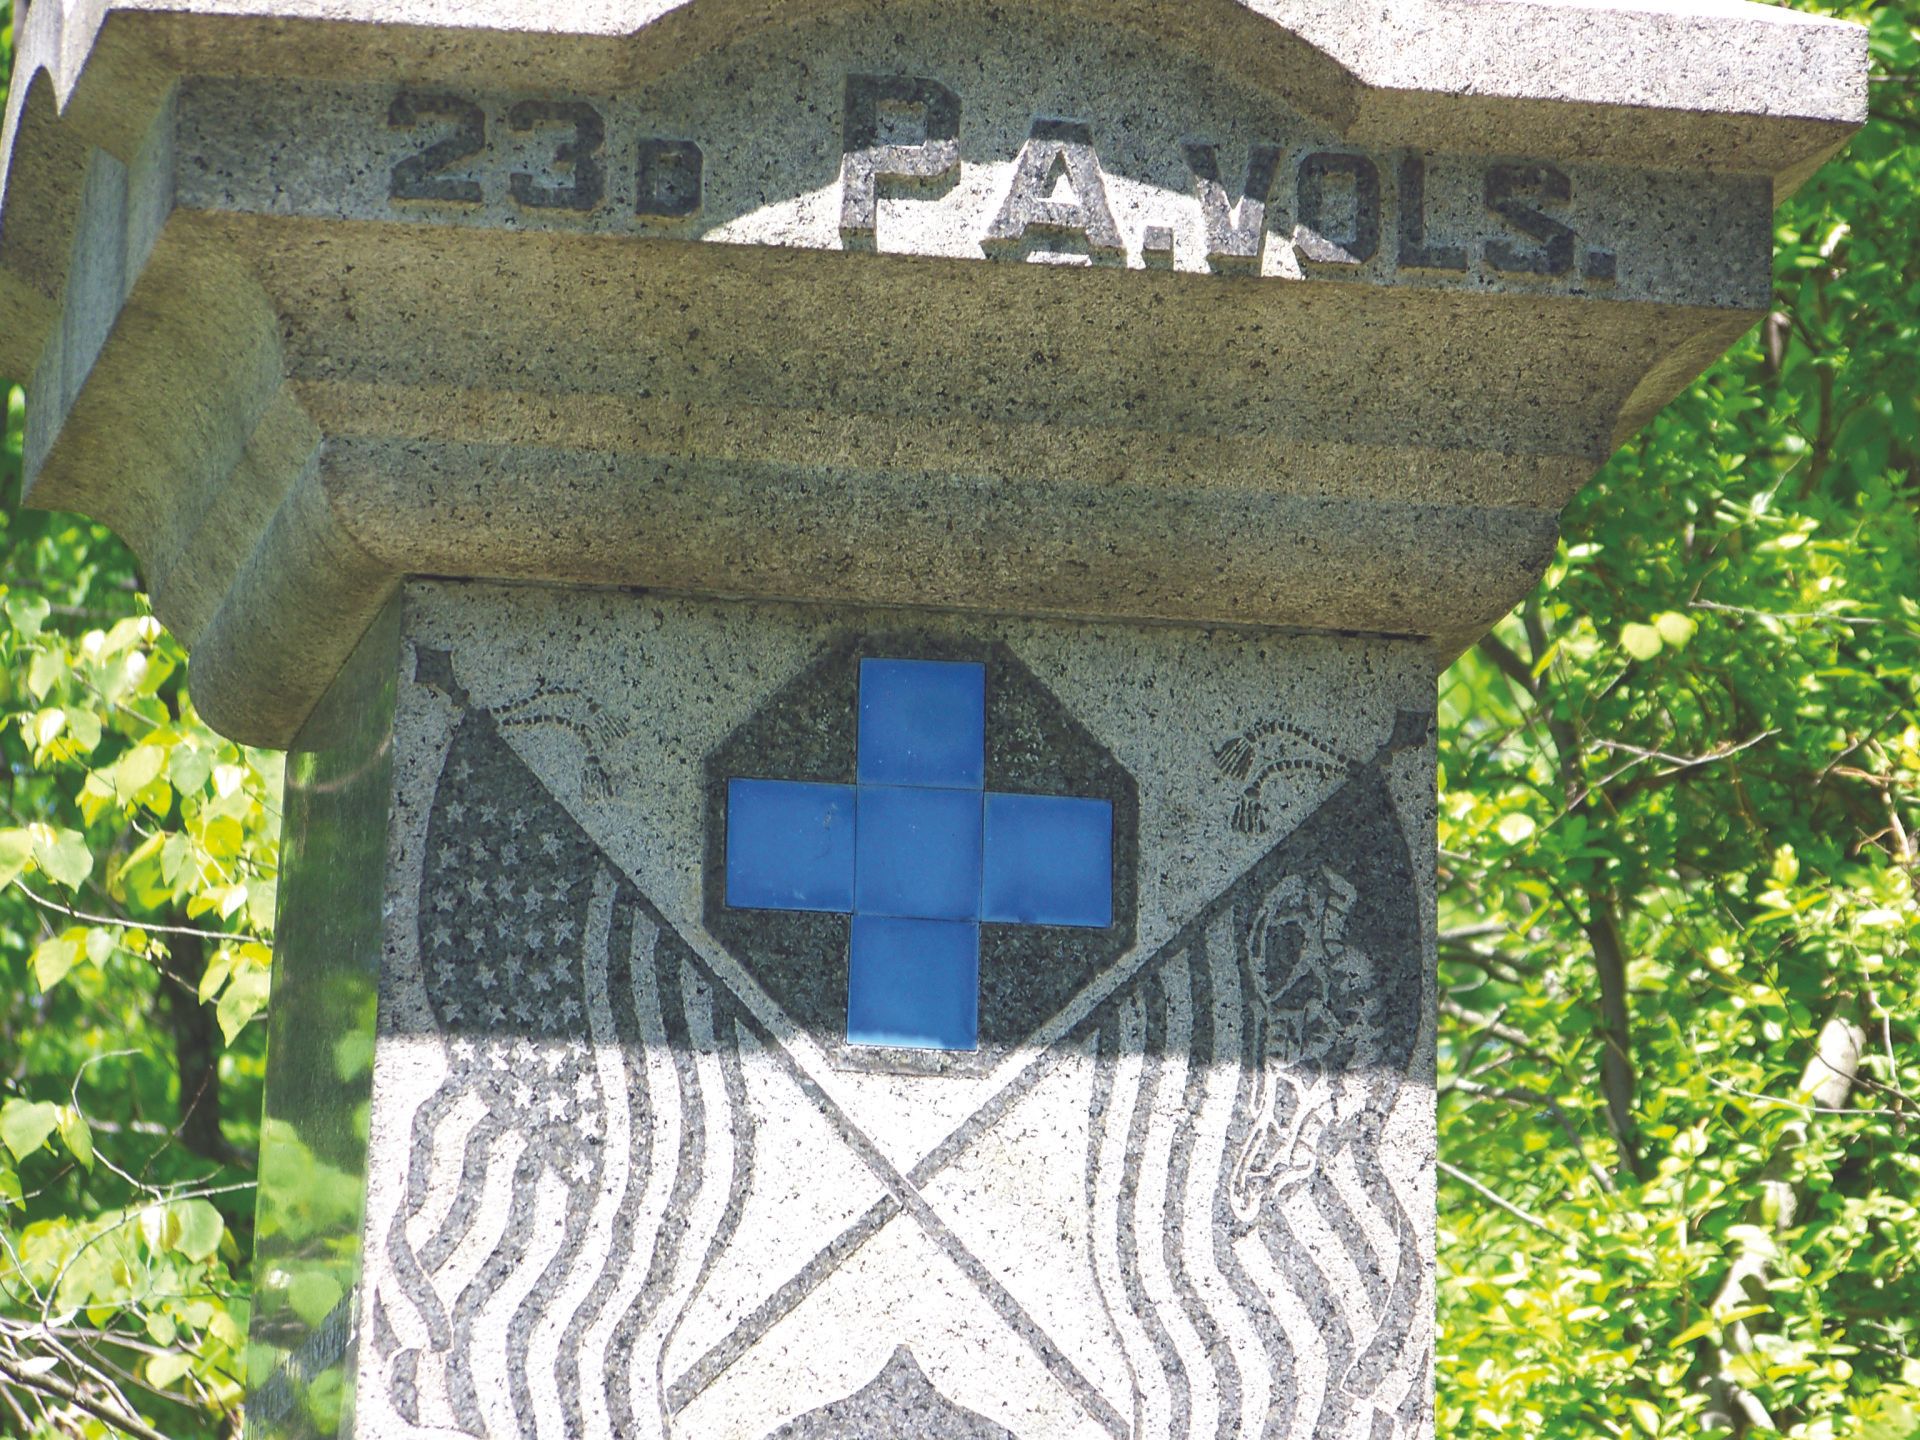 The Greek Cross, shown here on the 23rd PA Memorial on Culp's Hill, the symbol of the Sixth Corps (Author photo)